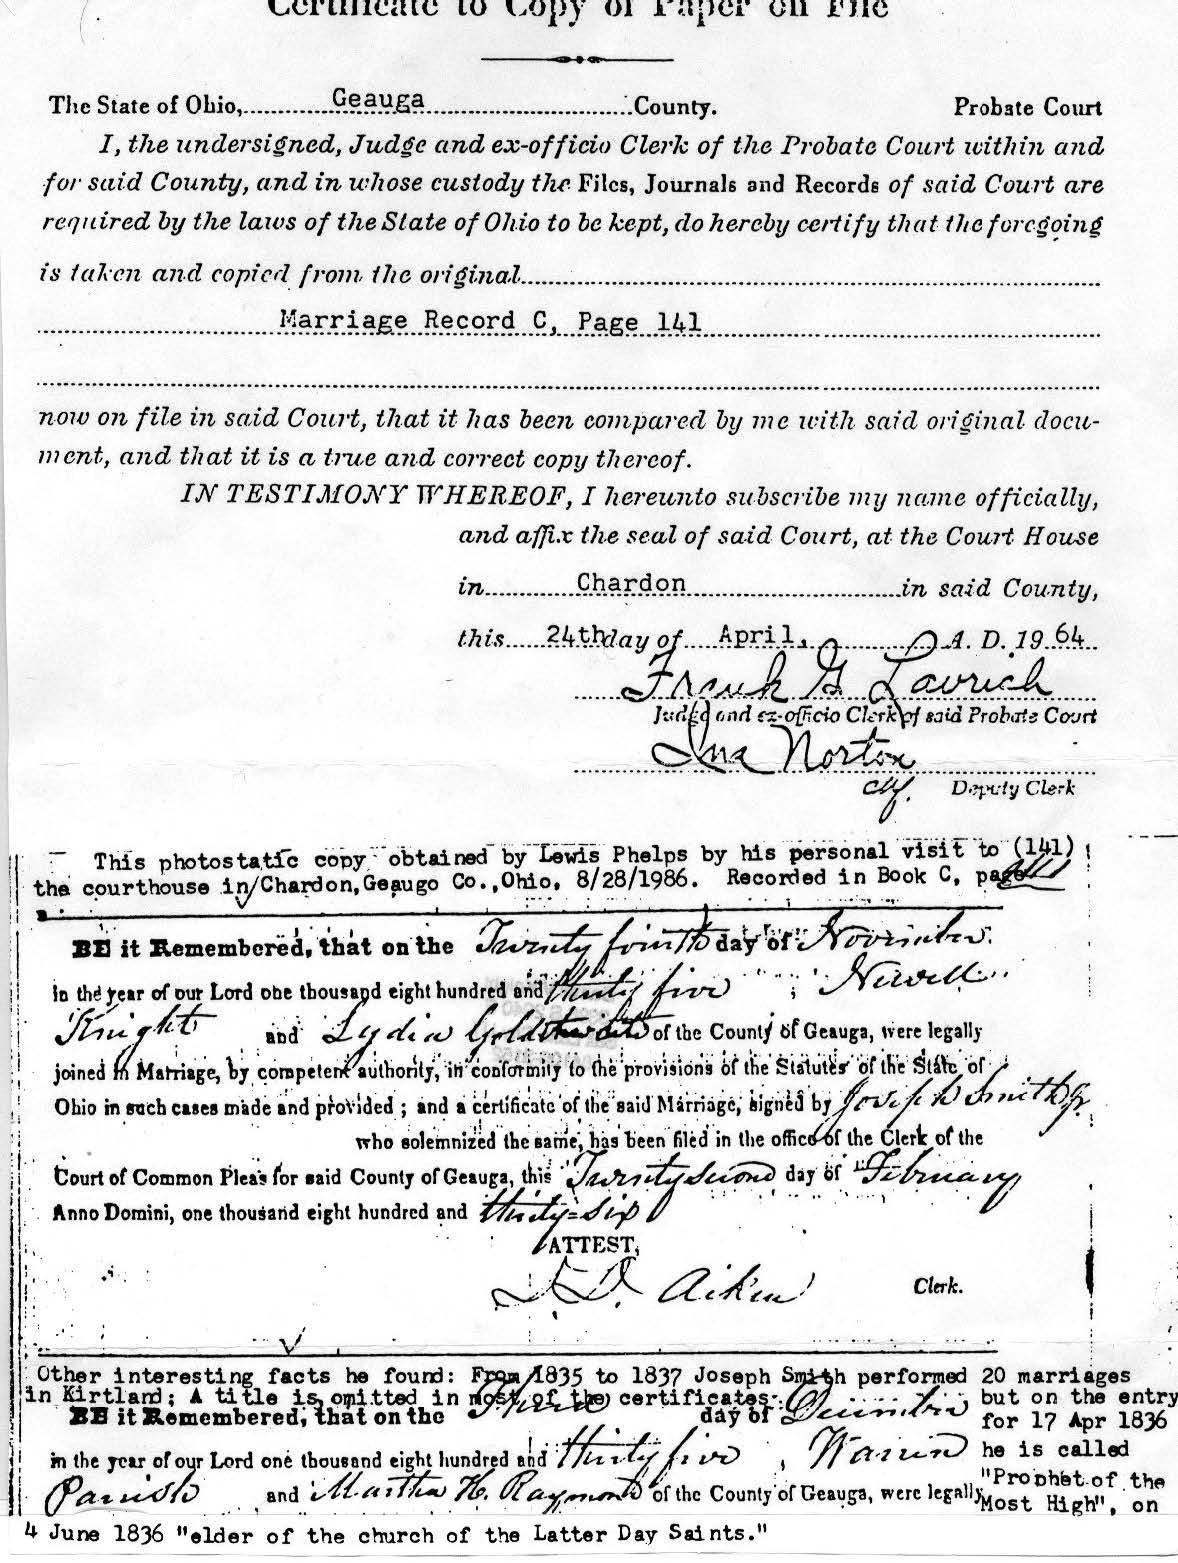 Newel and Lydia’s marriage certificate. Courtesy of Knight family.